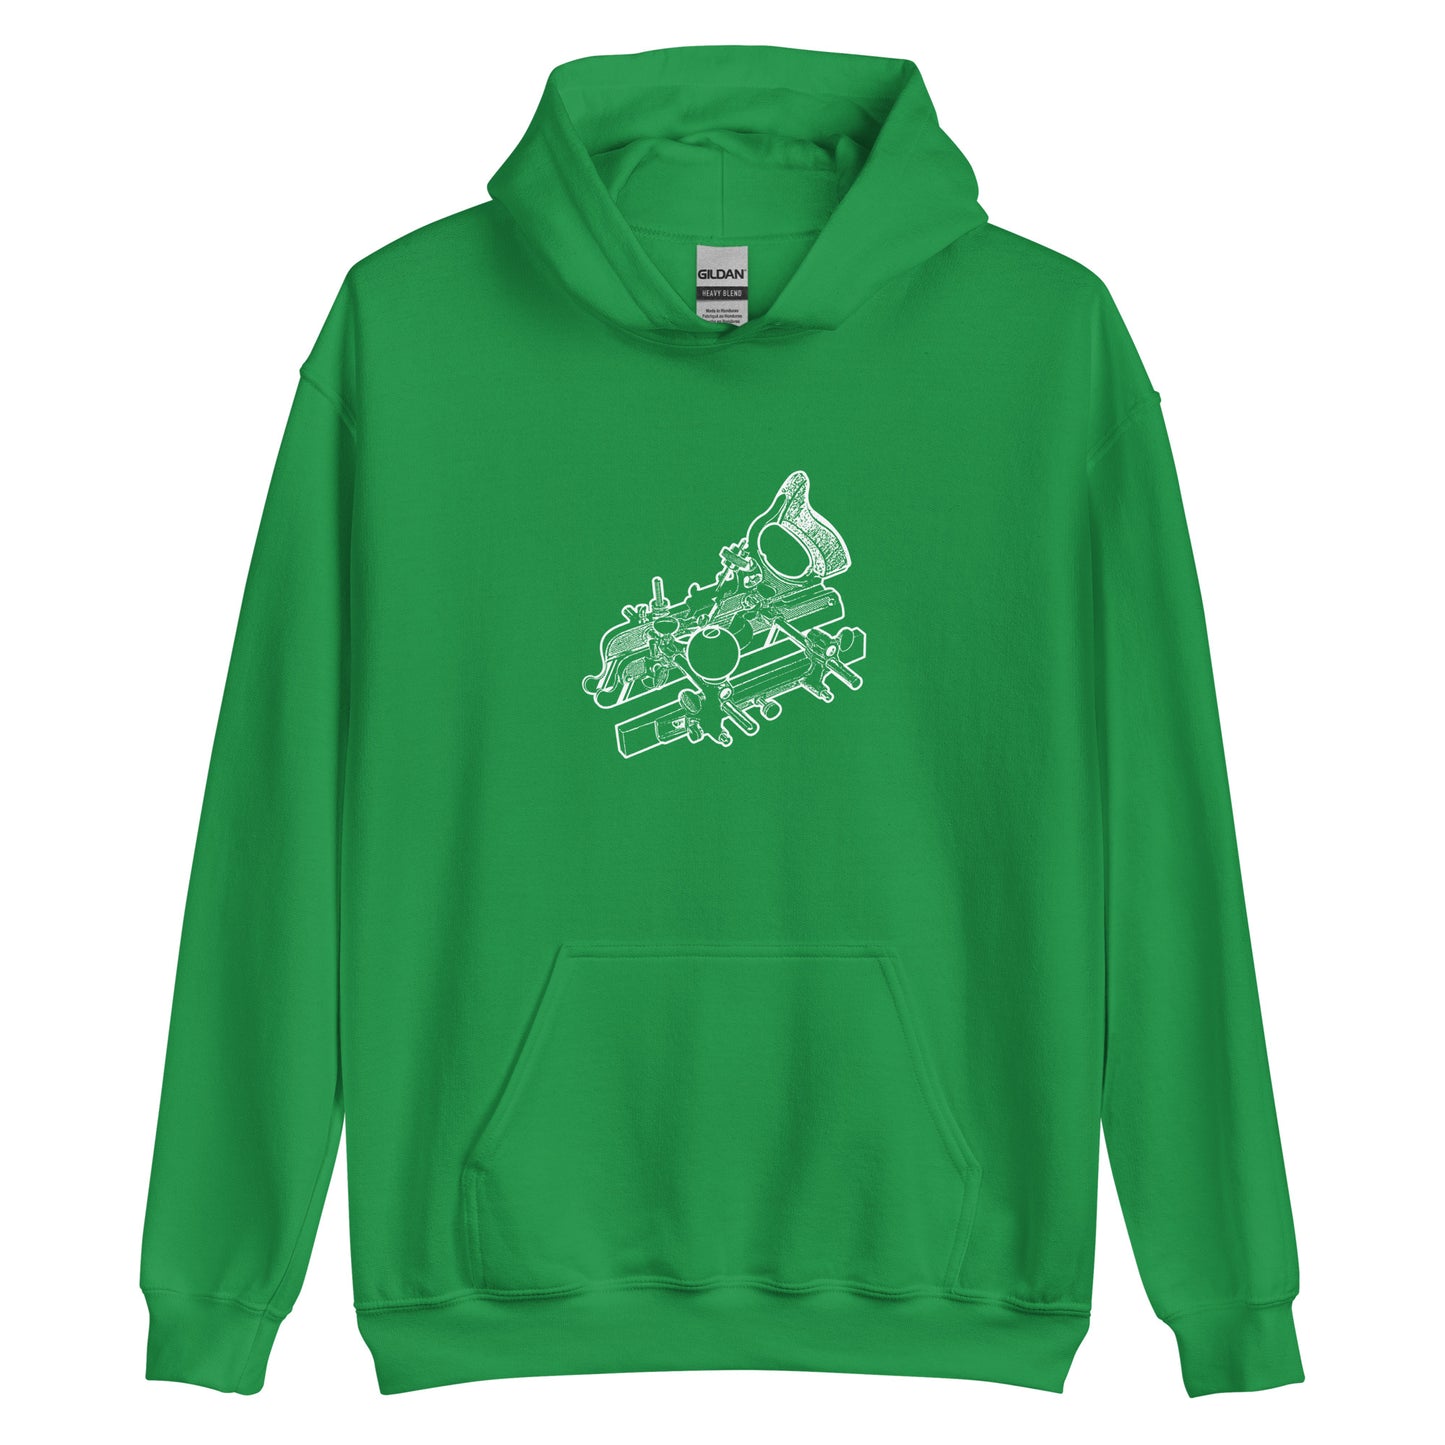 "Stanley 45 Combination Plane" Unisex Hoodie for Woodworkers (Multiple Colors)